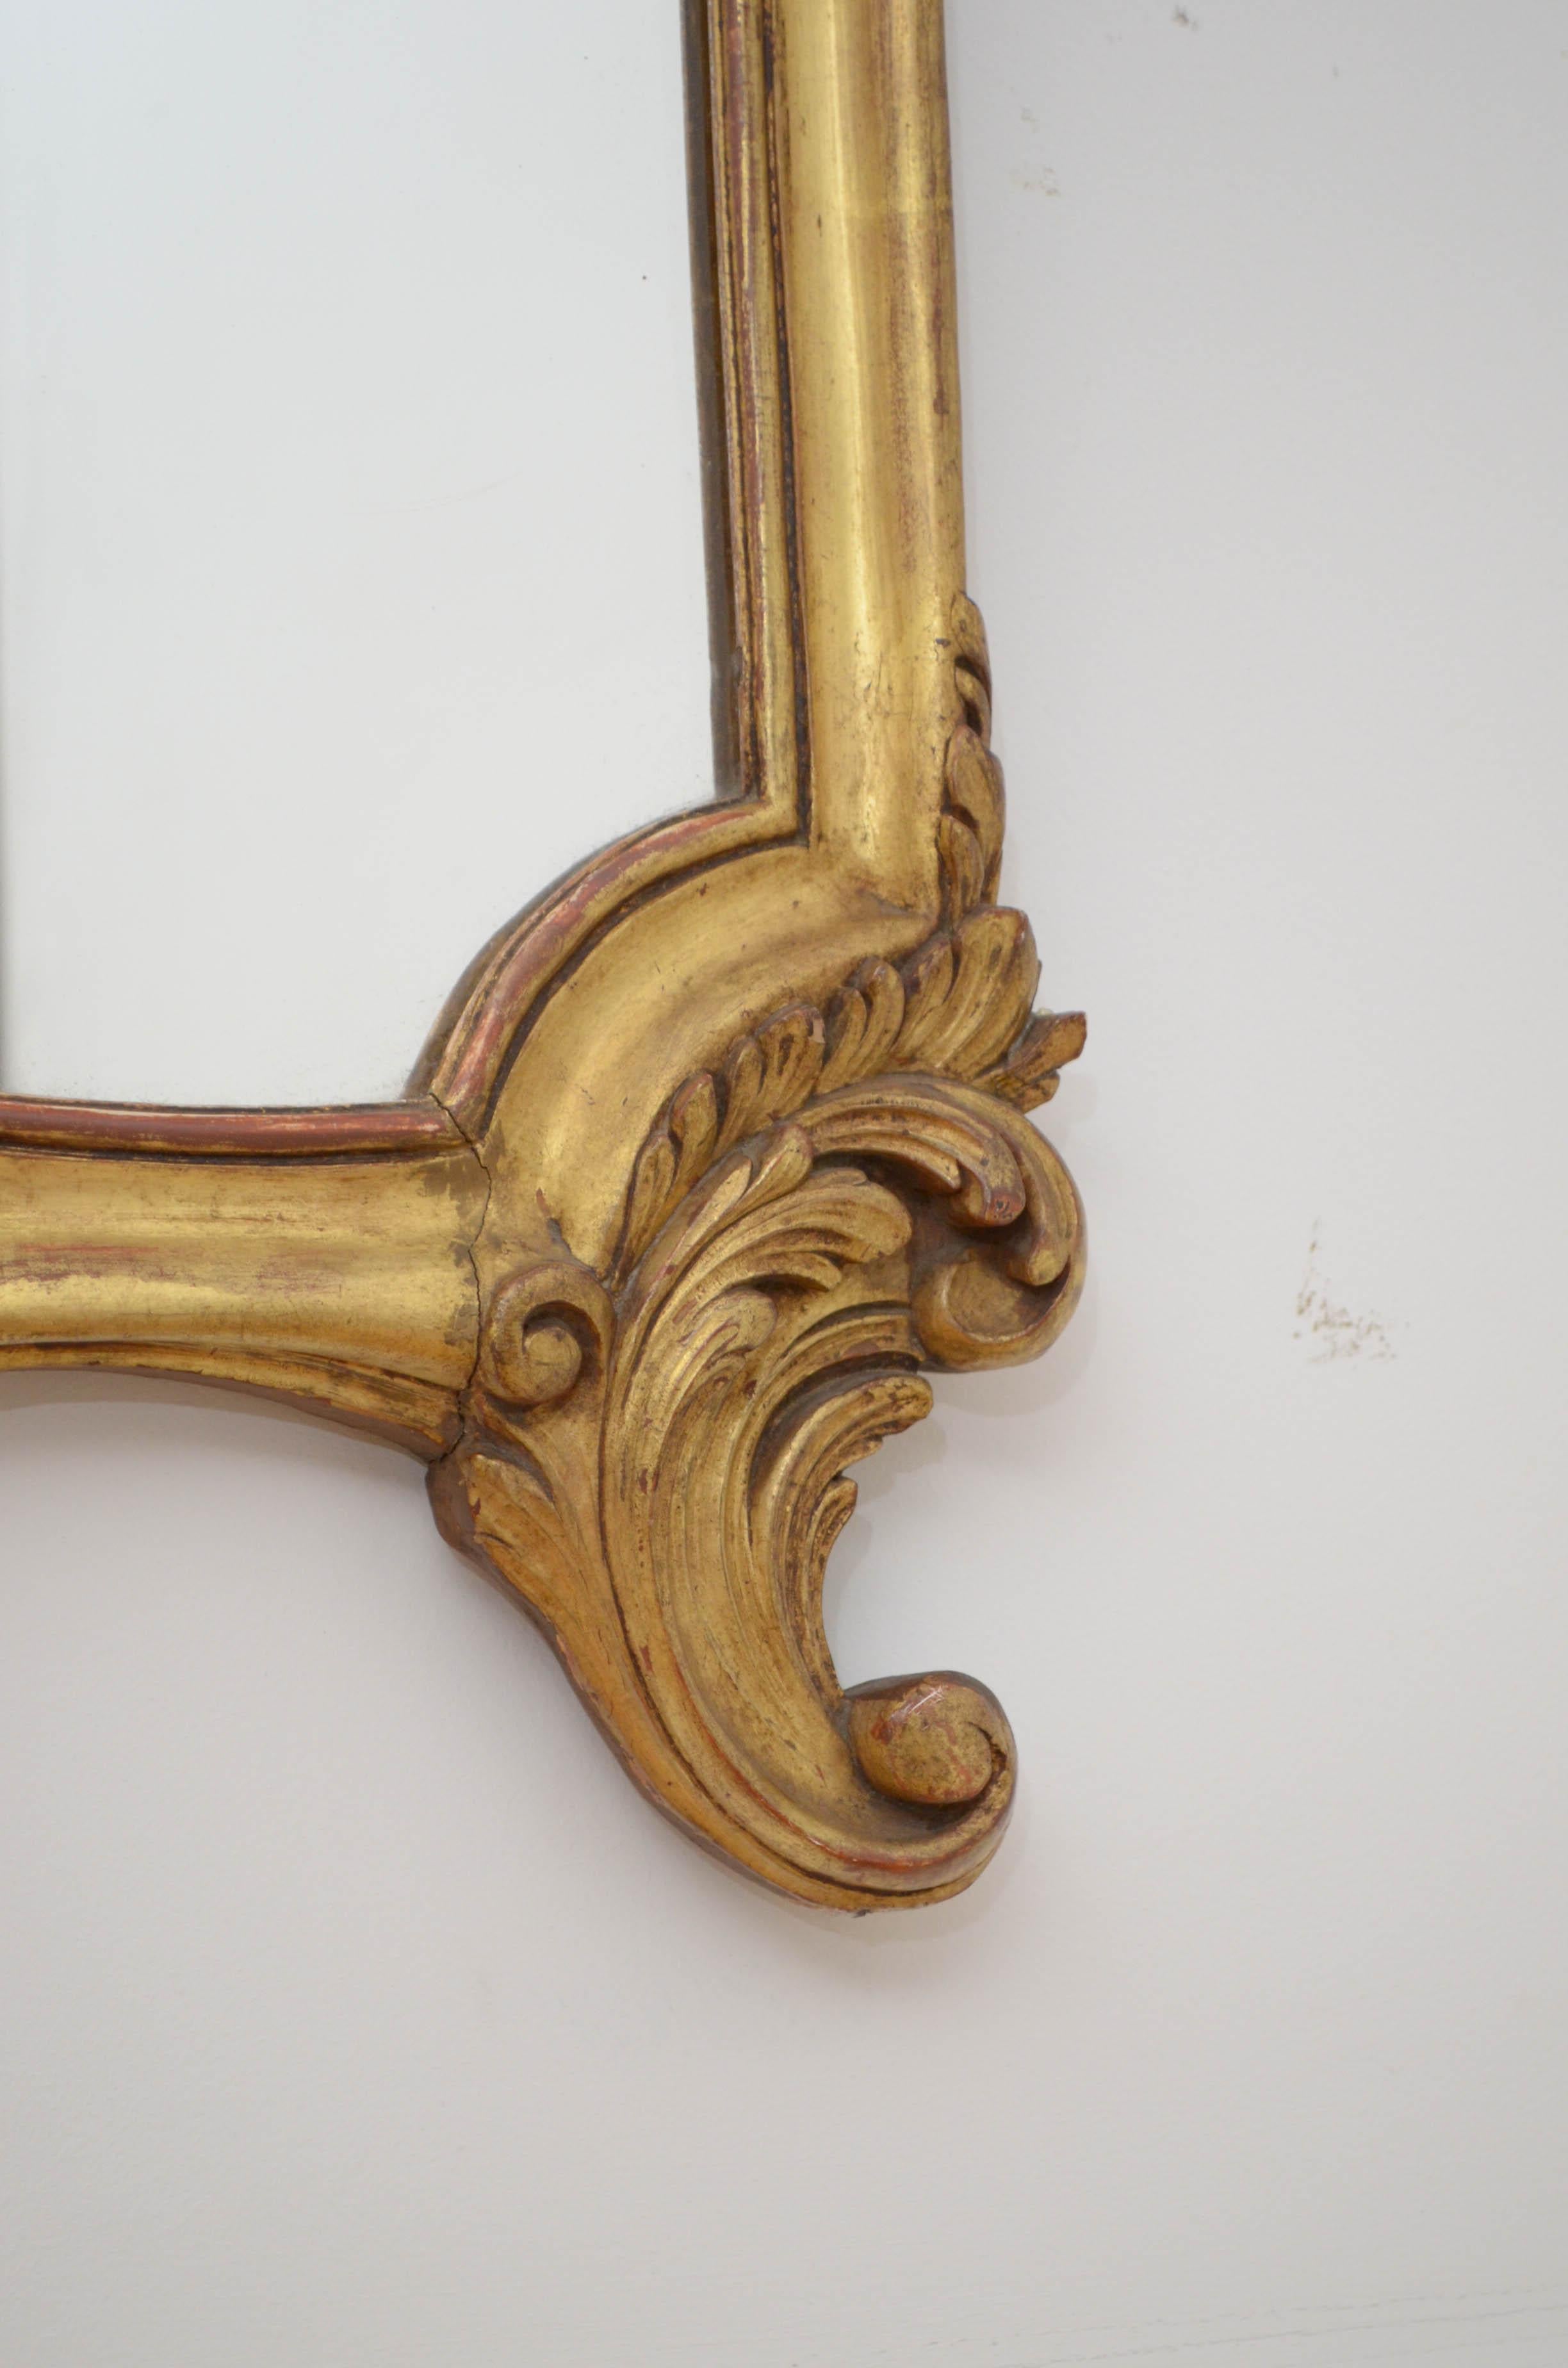 Turn of the Century Giltwood Wall Mirror 1